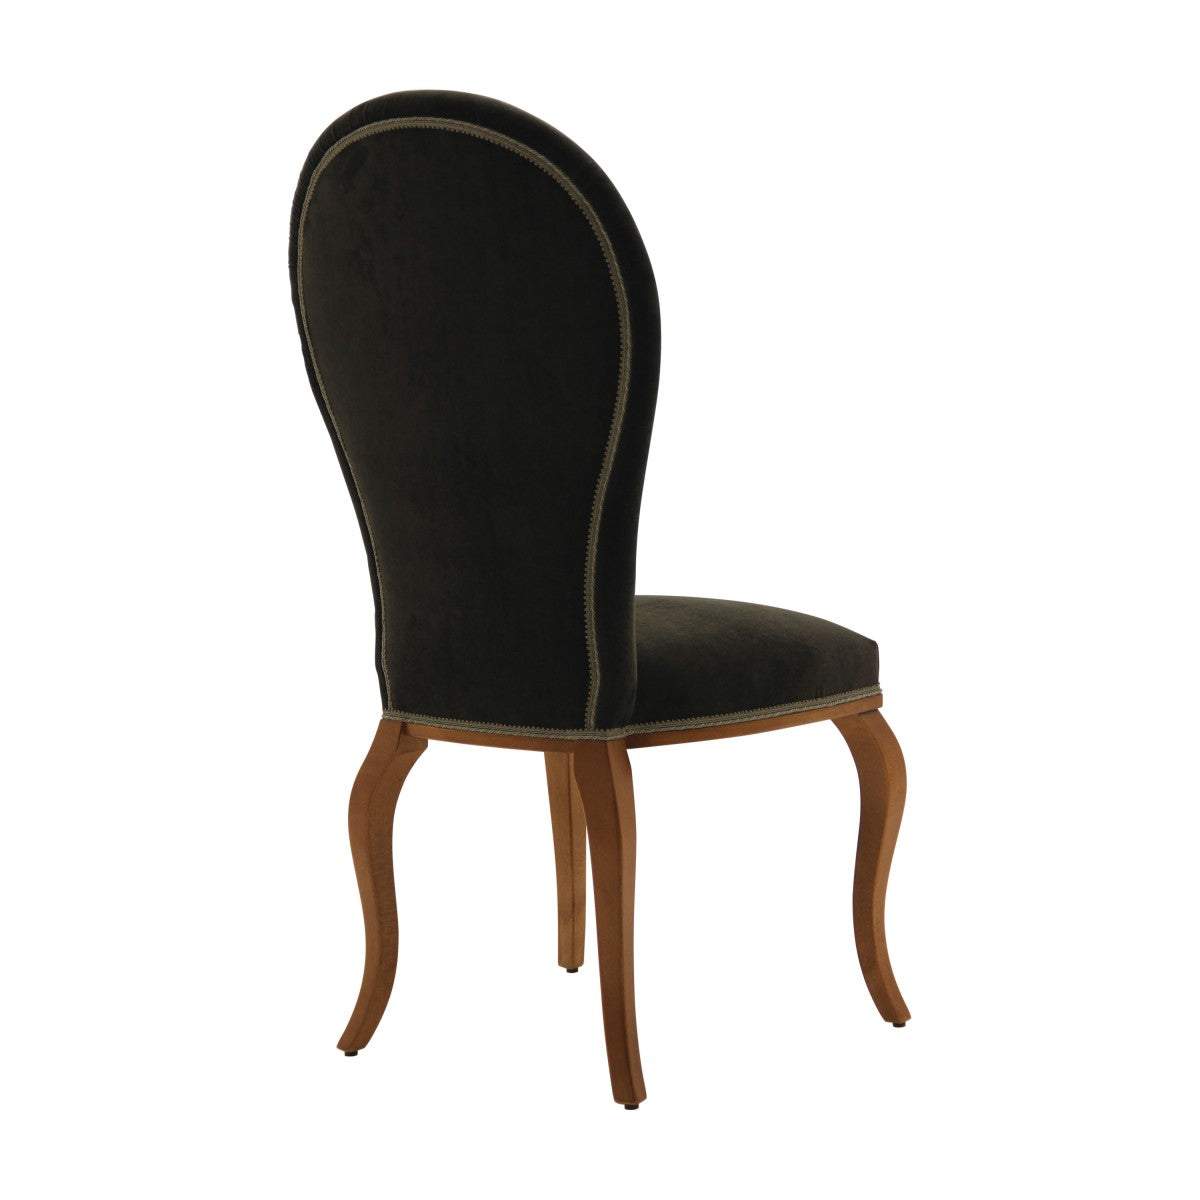 Sophia Bespoke Upholstered Modern Contemporary Dining Chair MS180S Custom Made To Order